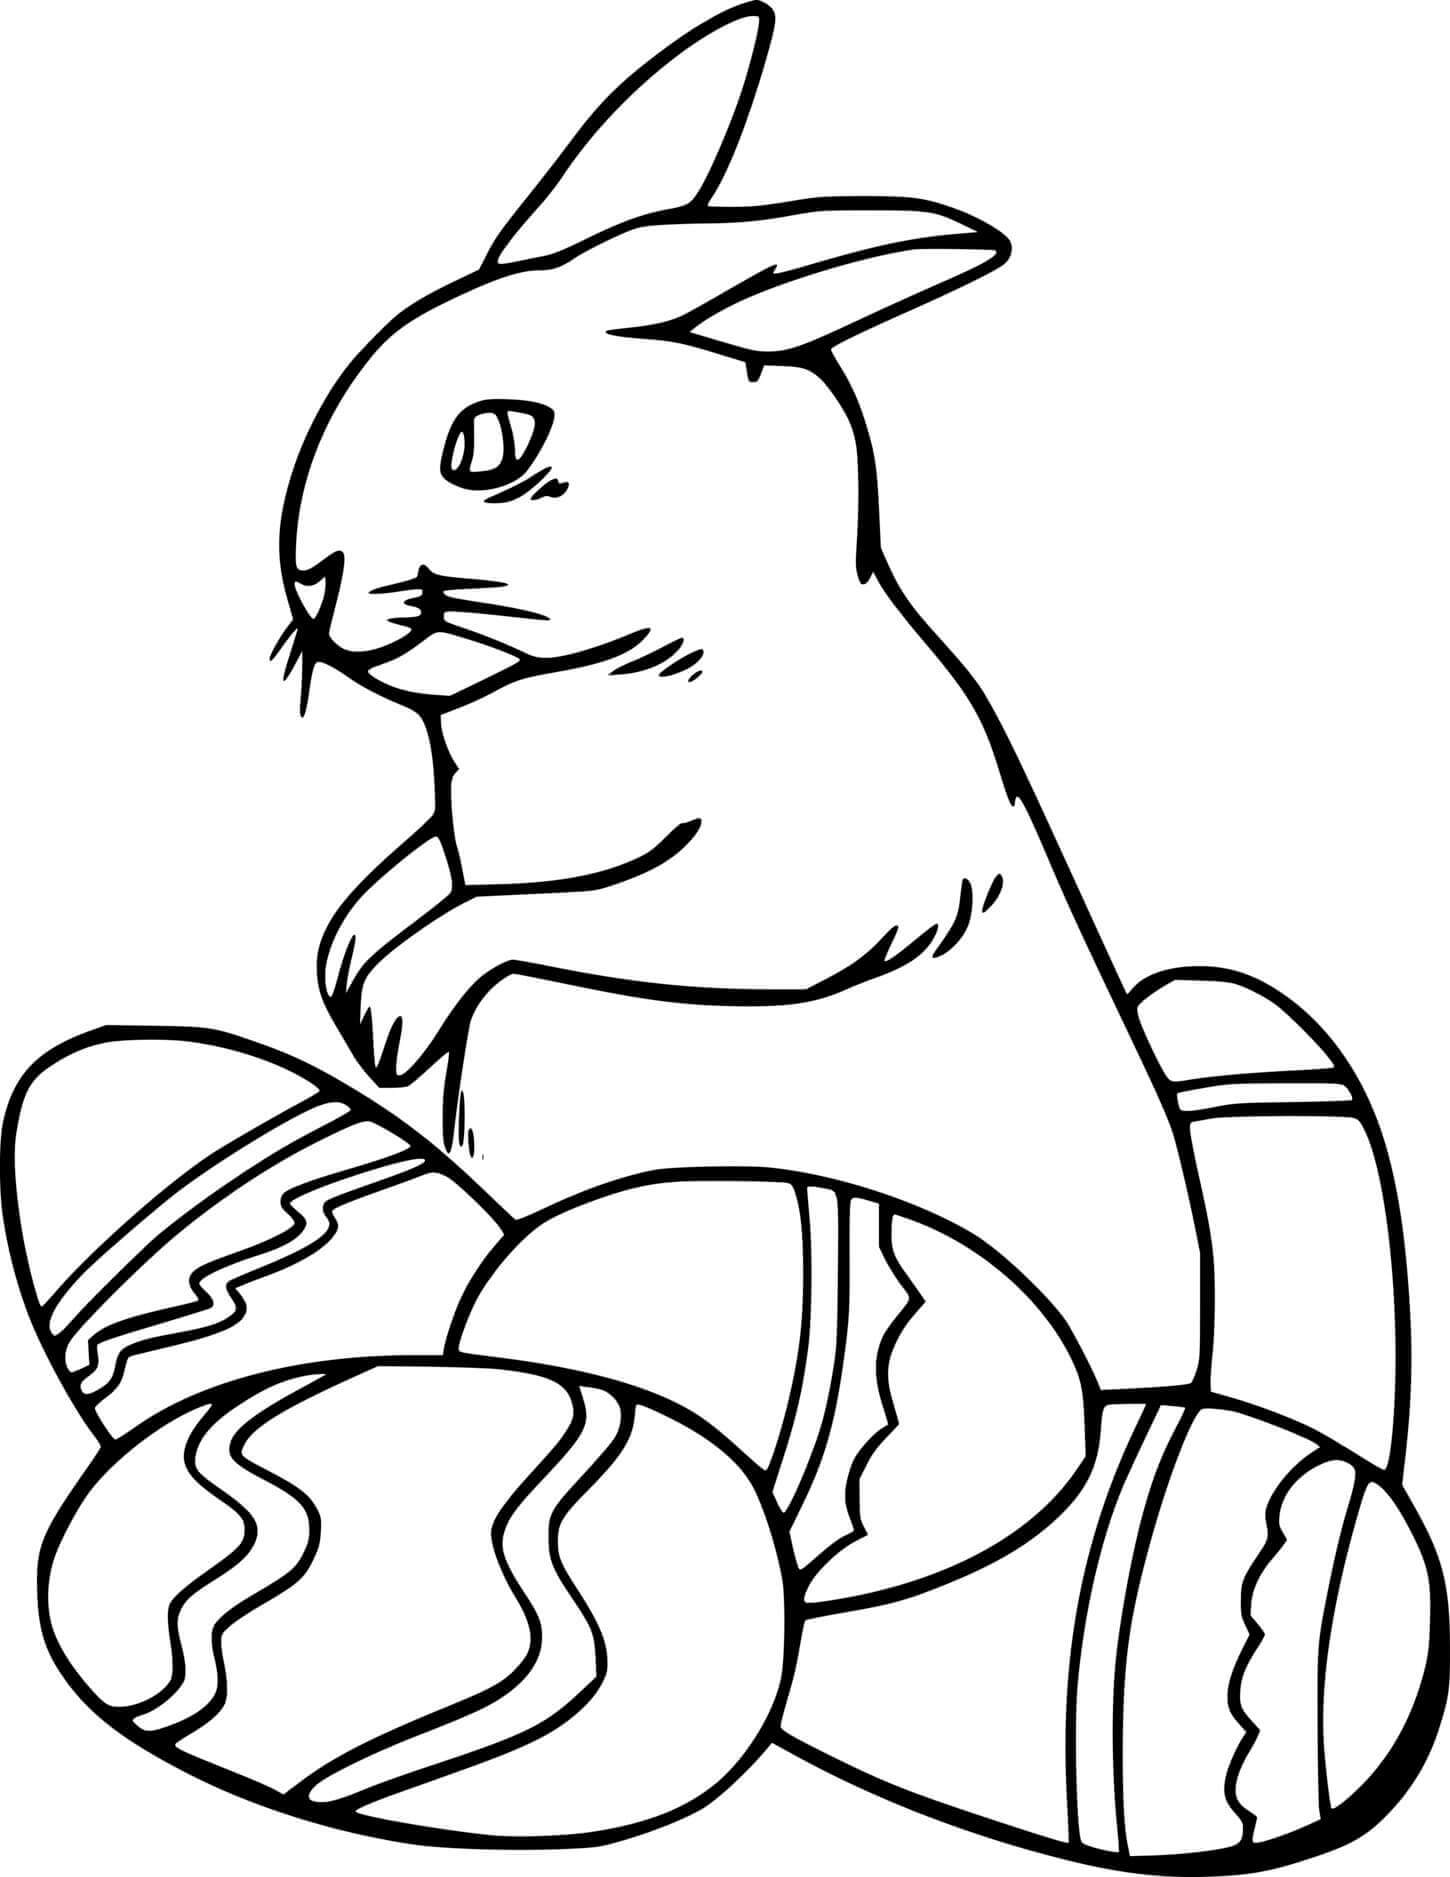 Easter Bunny And Five Eggs Coloring Page